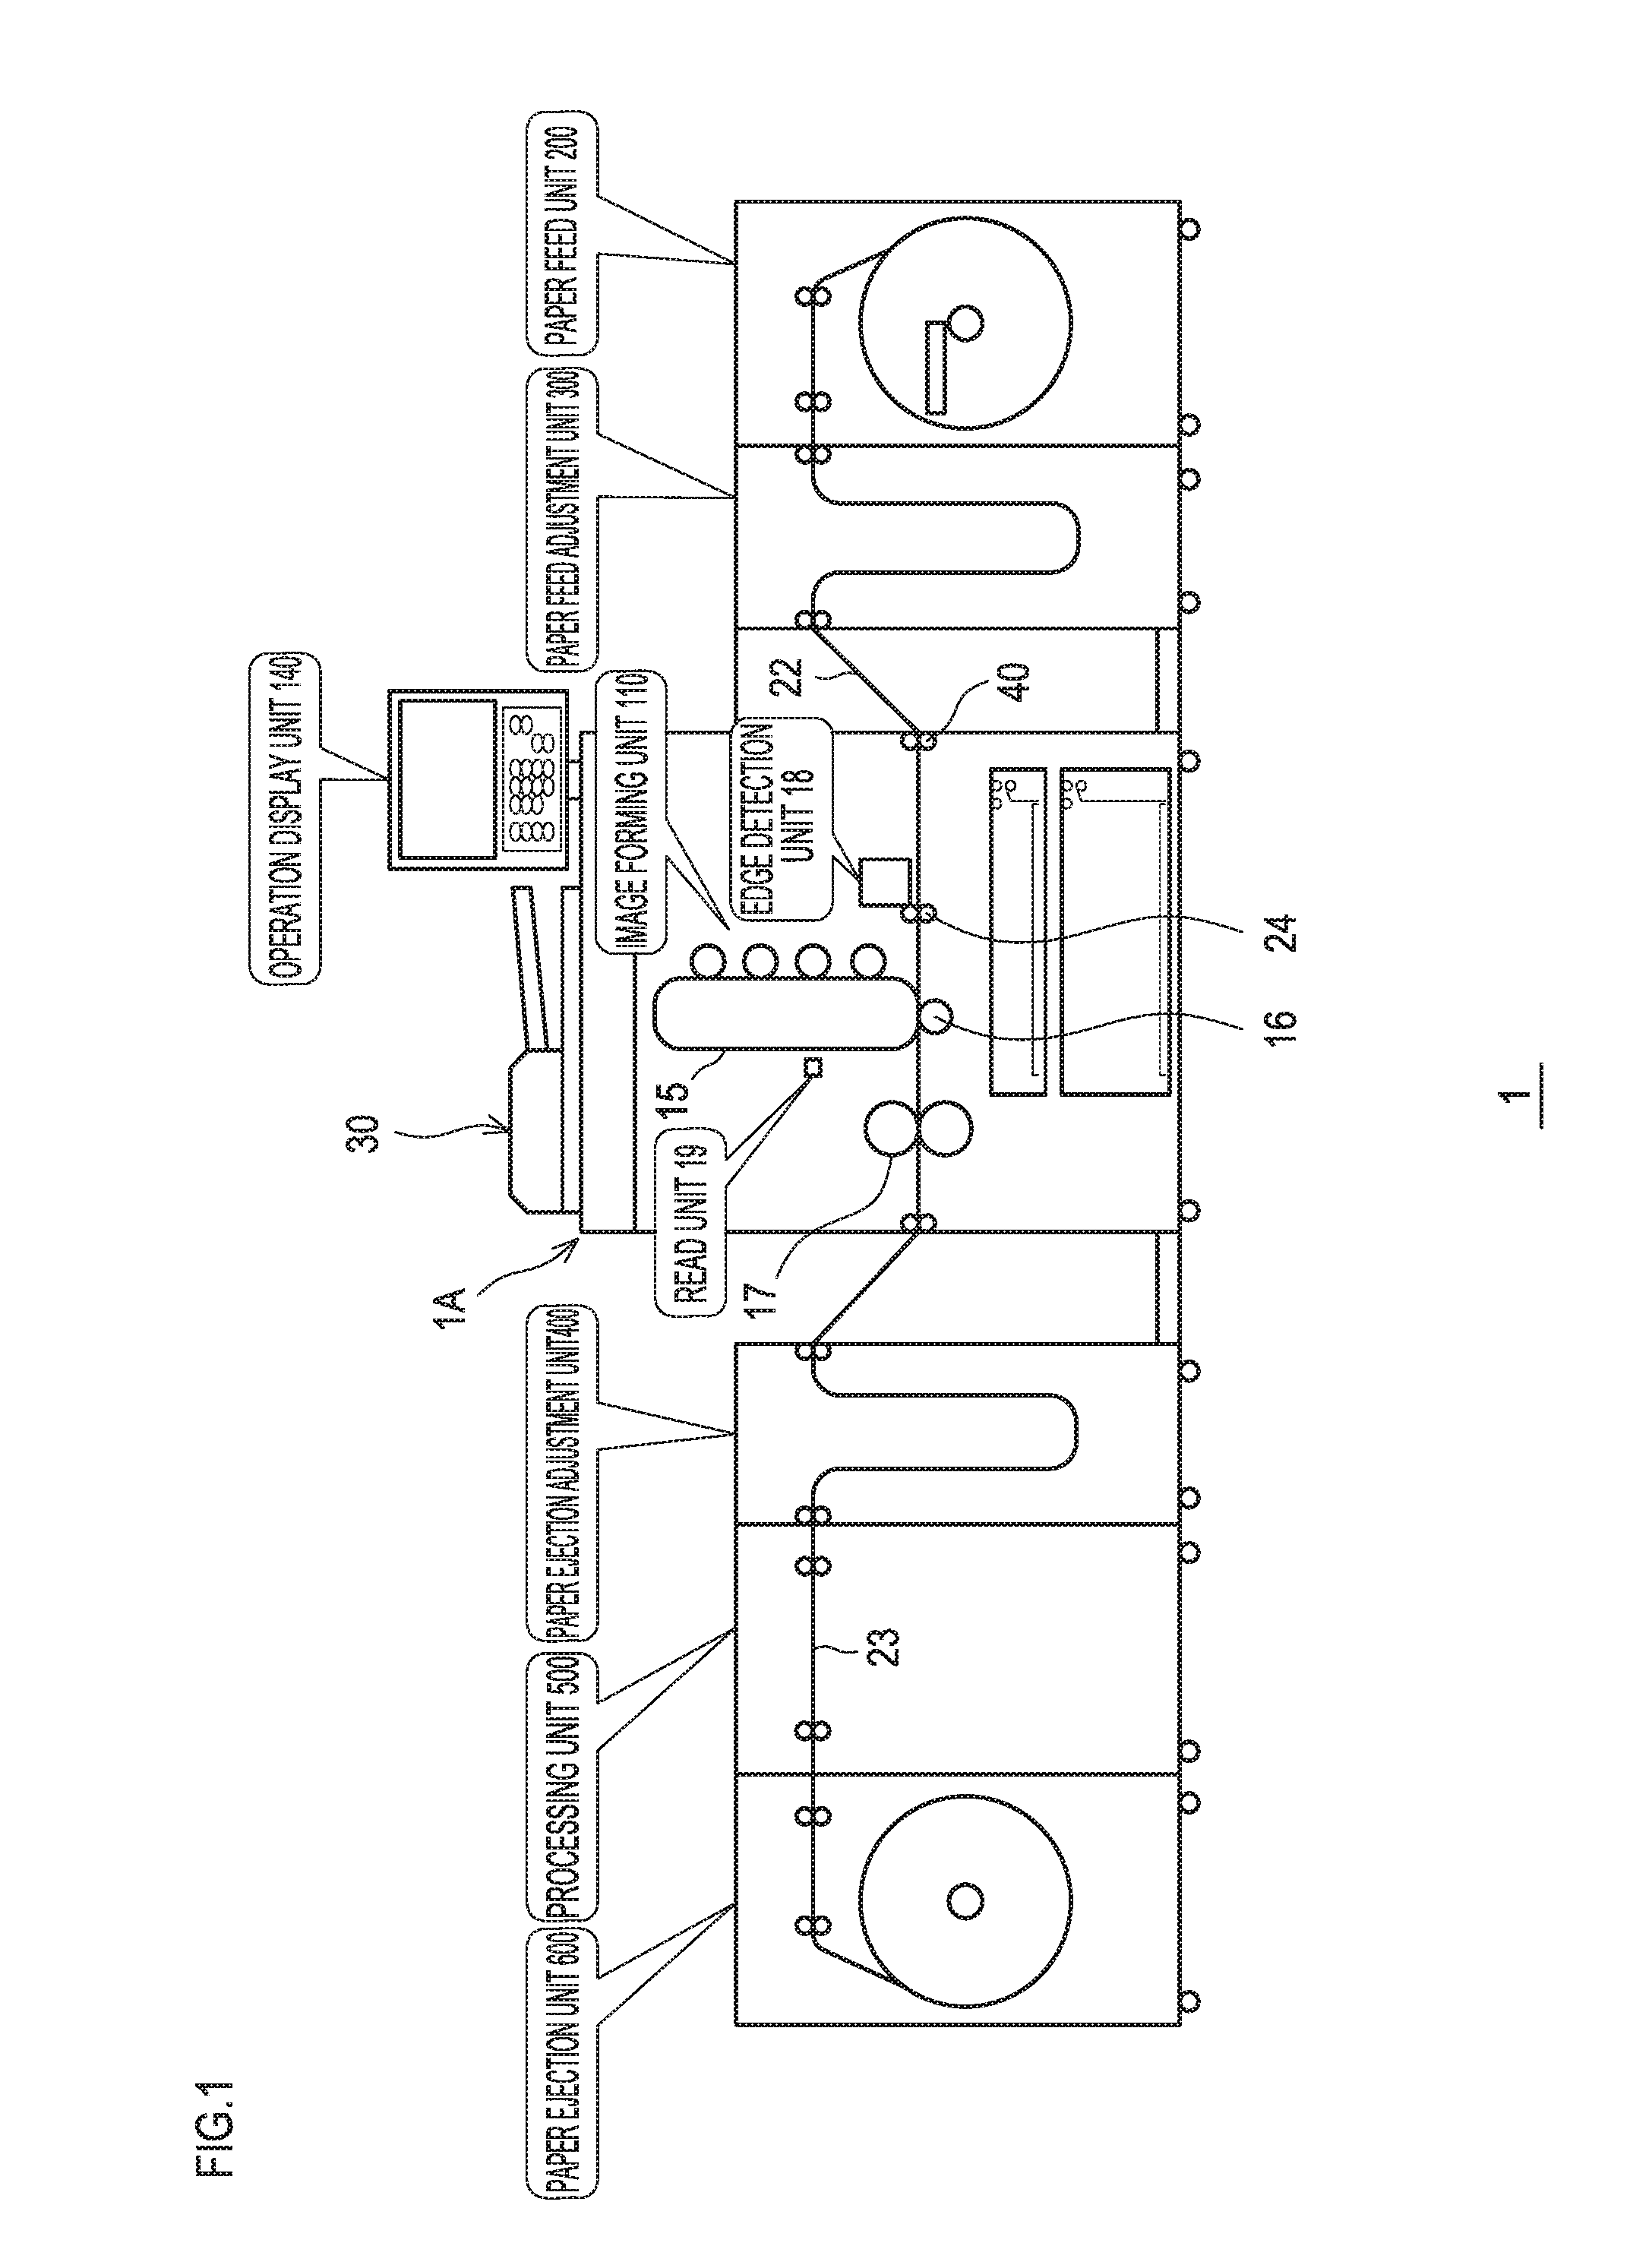 Image forming device, image forming system, and image forming method